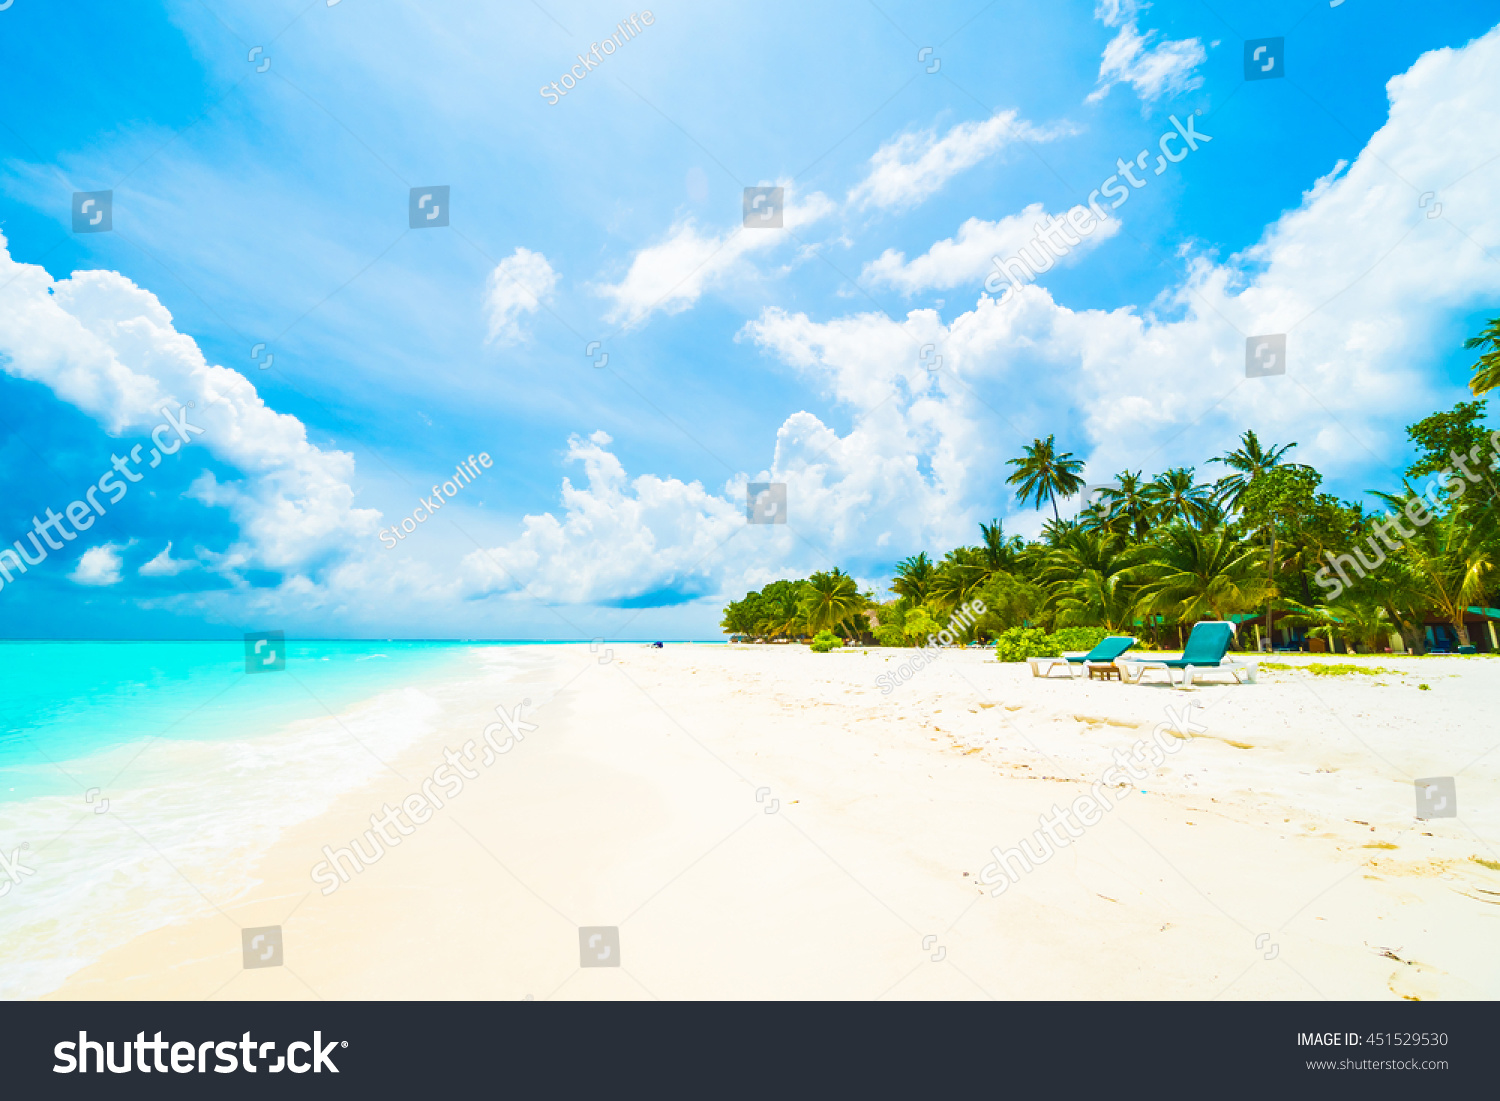 Beautiful tropical beach and sea in maldives island with coconut palm tree and blue sky background
 #451529530